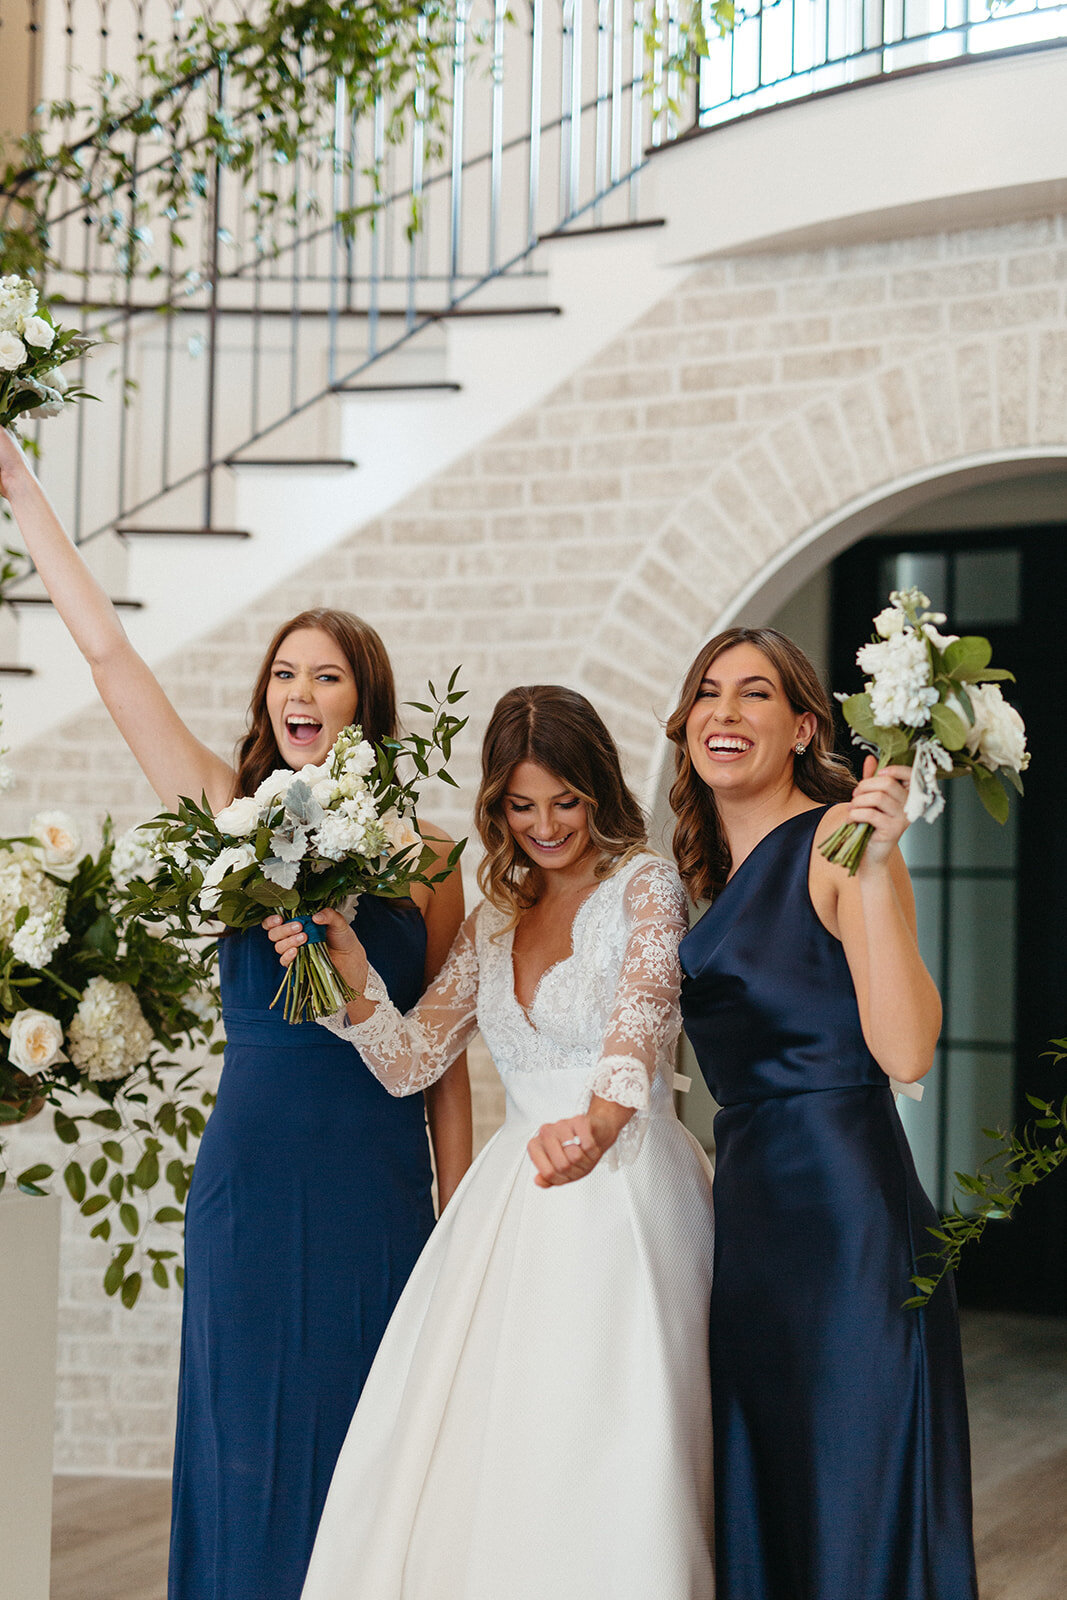 A bride in a white wedding gown and two bridesmaids in blue hold white bouquets smiling by staircase wrapped in garland.